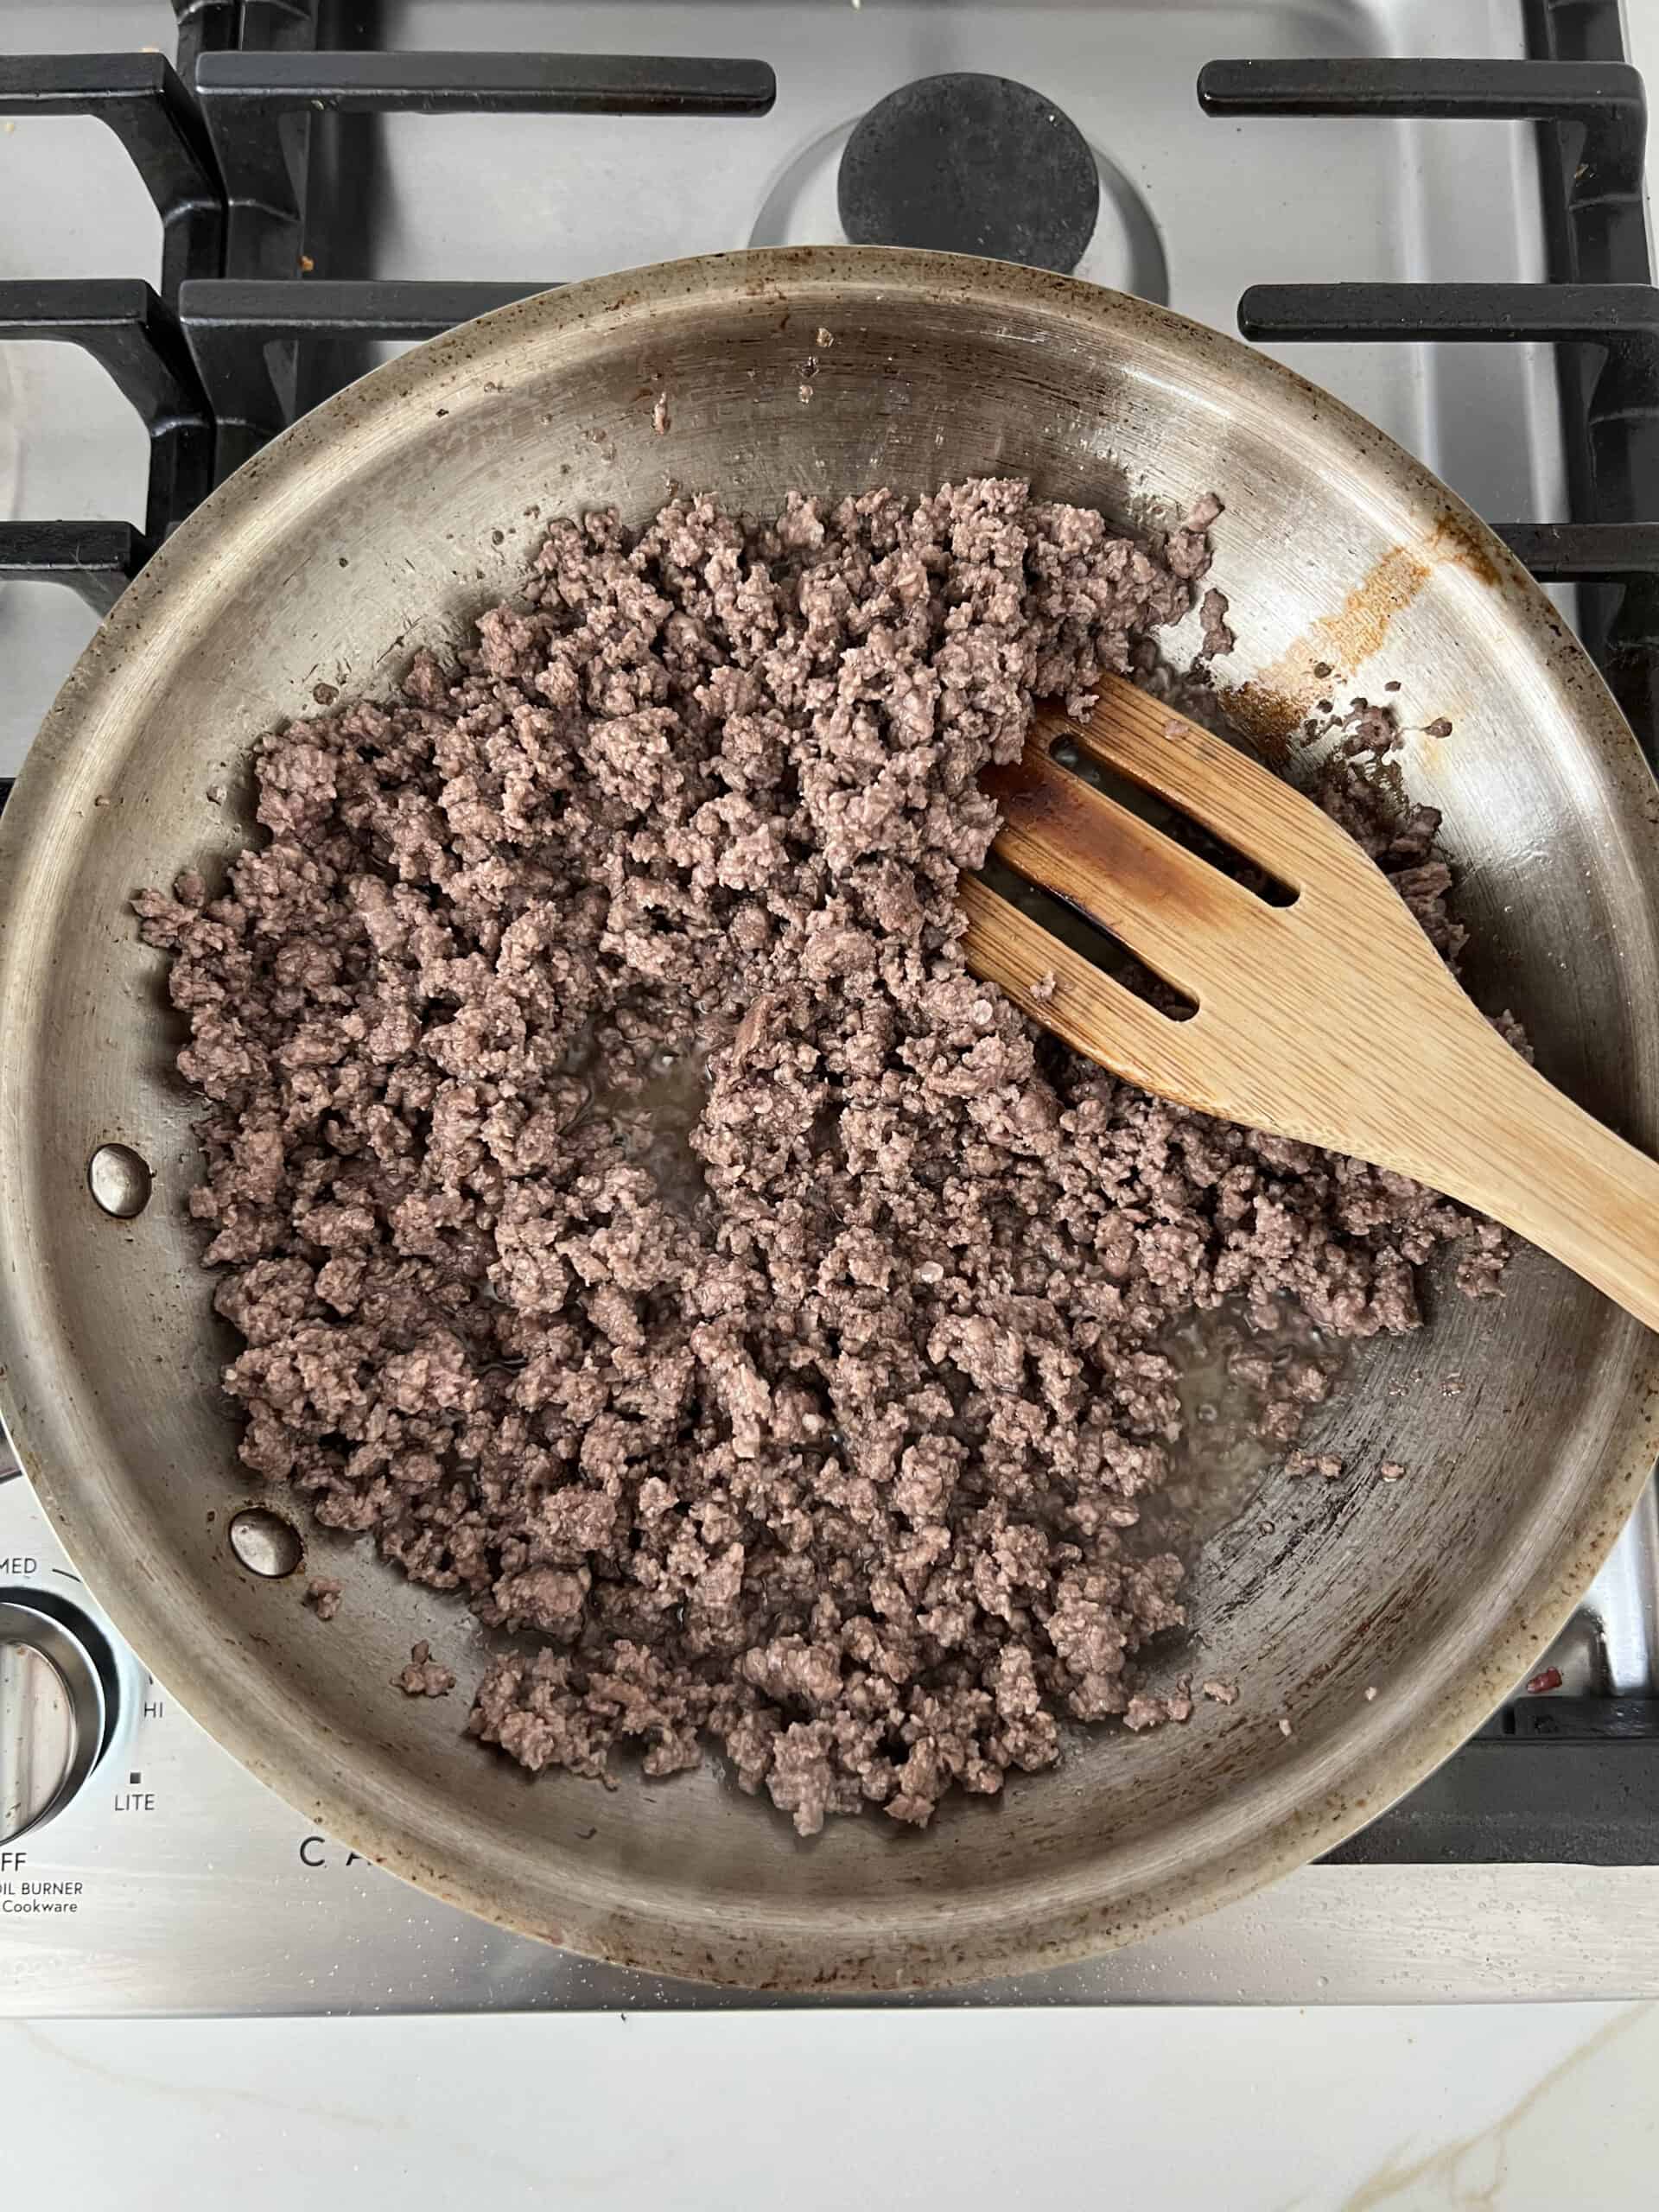 A frying pan with cooked ground beef in it.